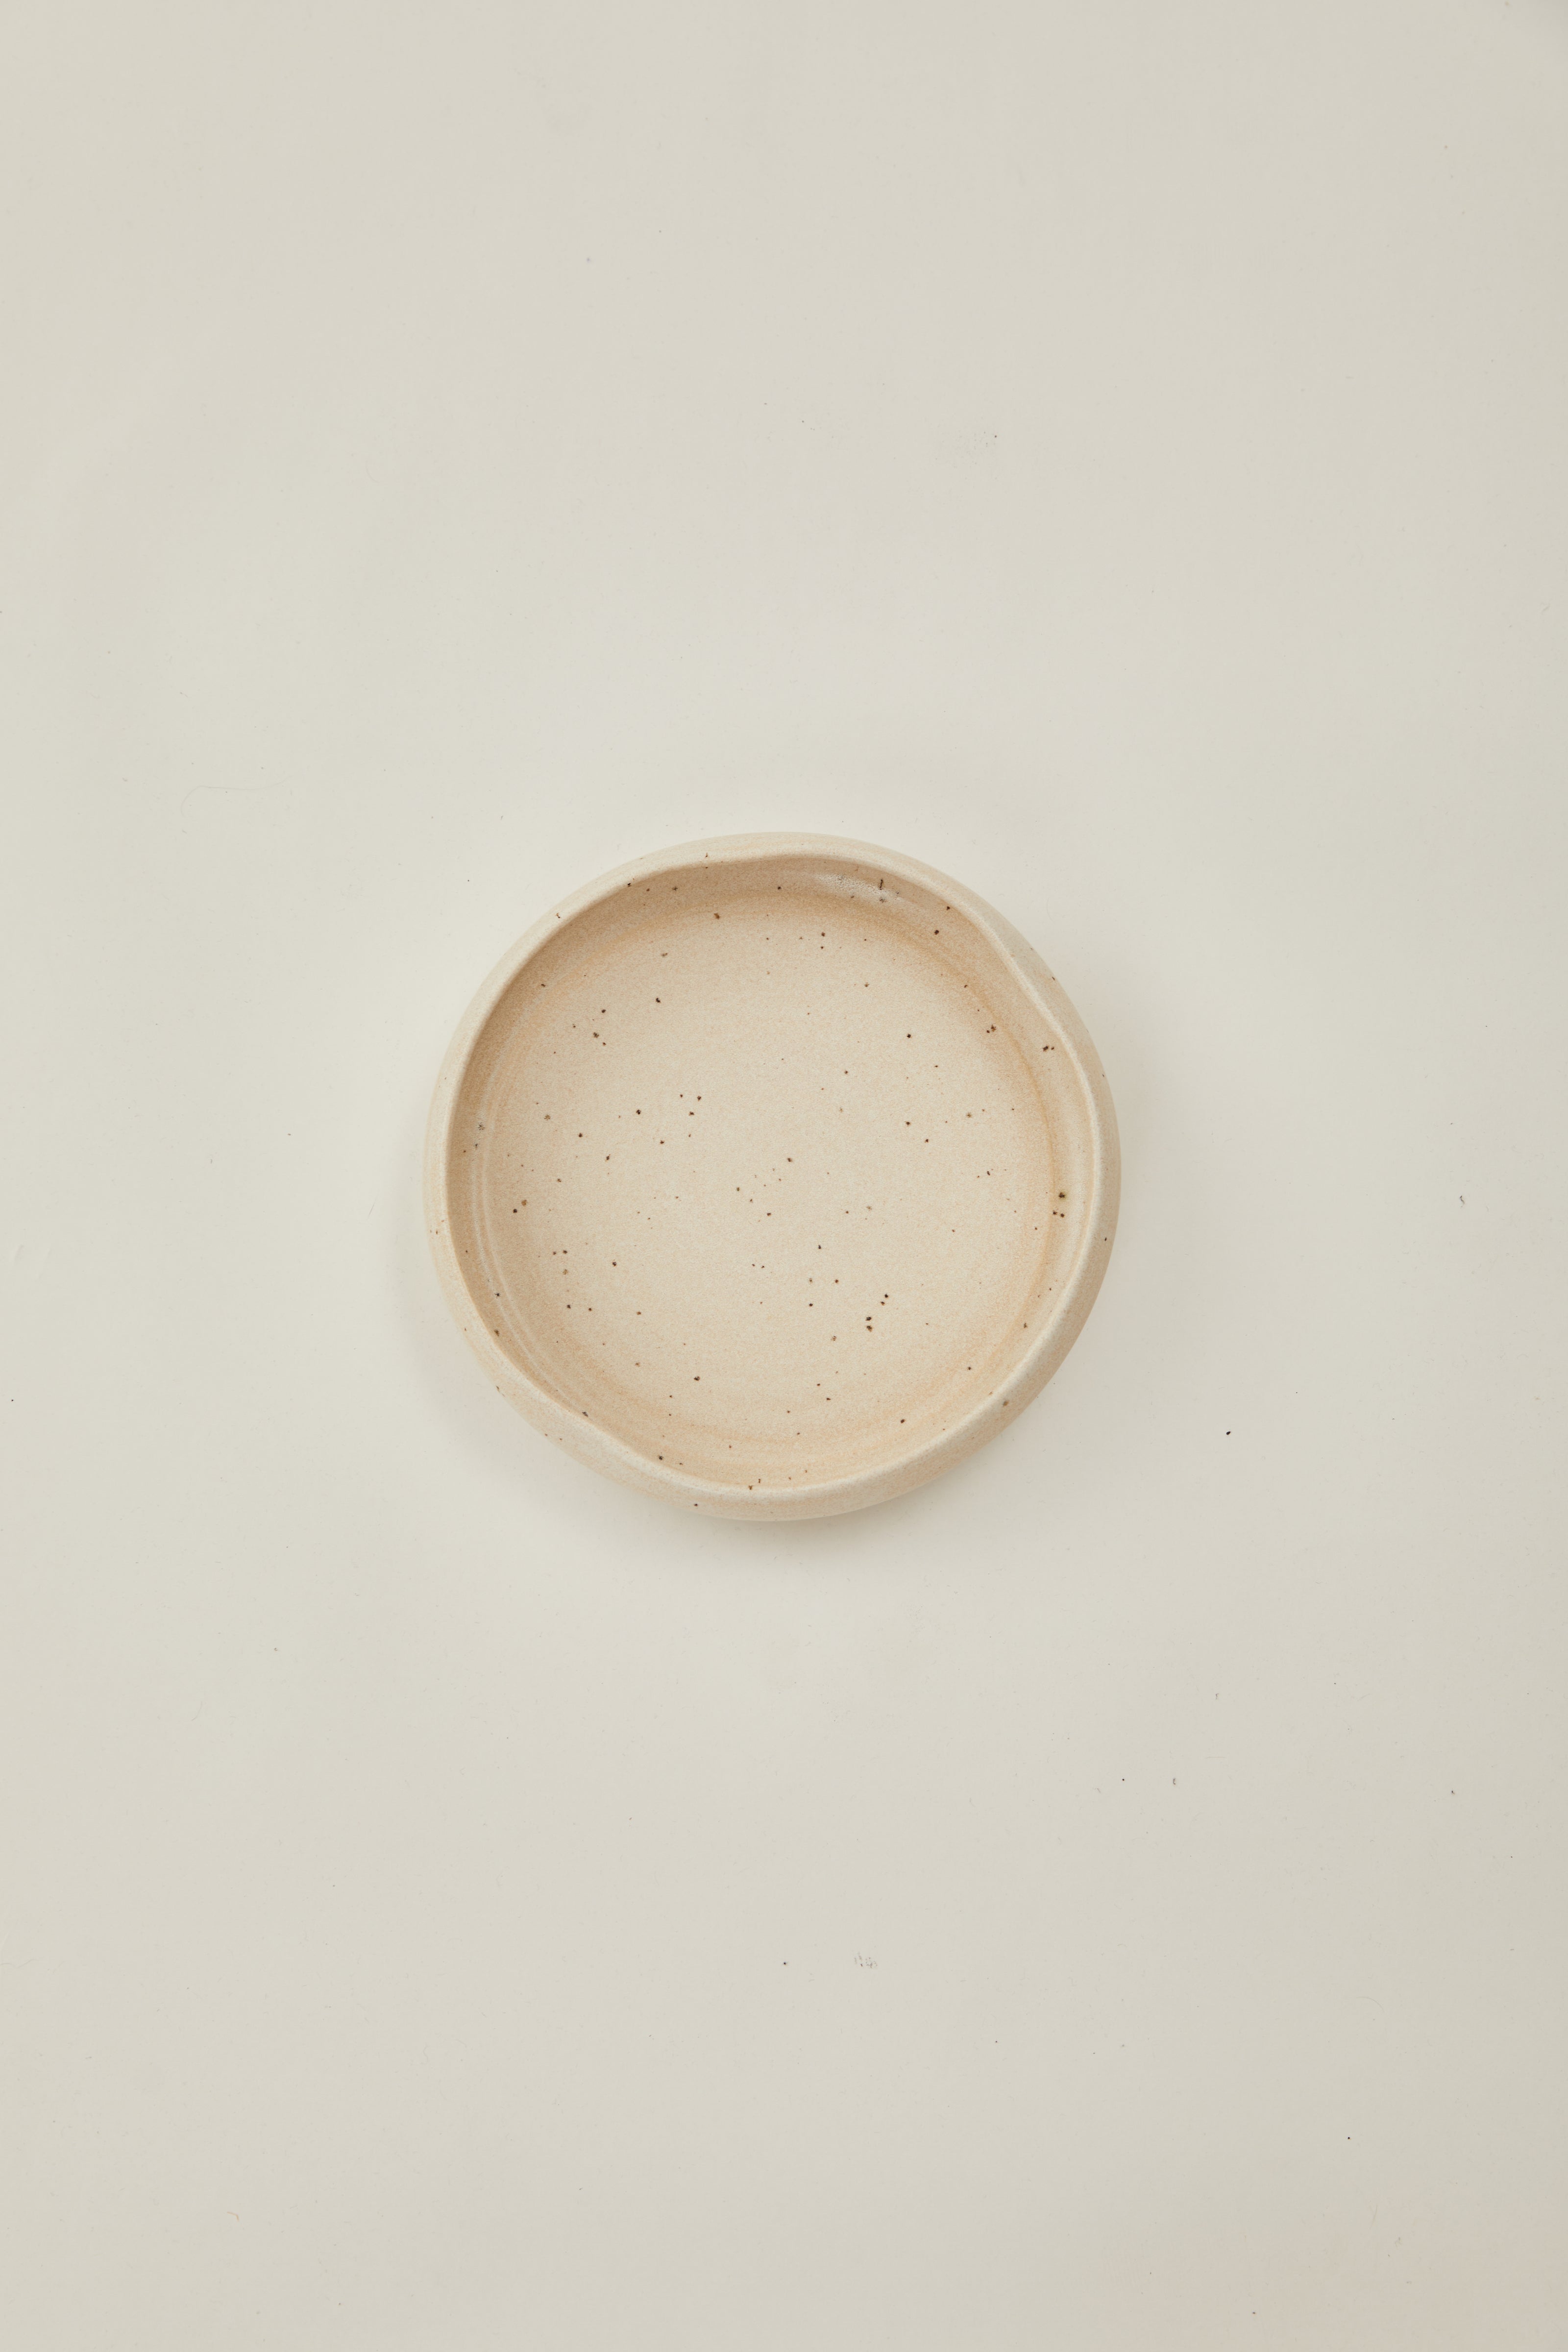 Rounded plate with Organic Rim in Sandstone